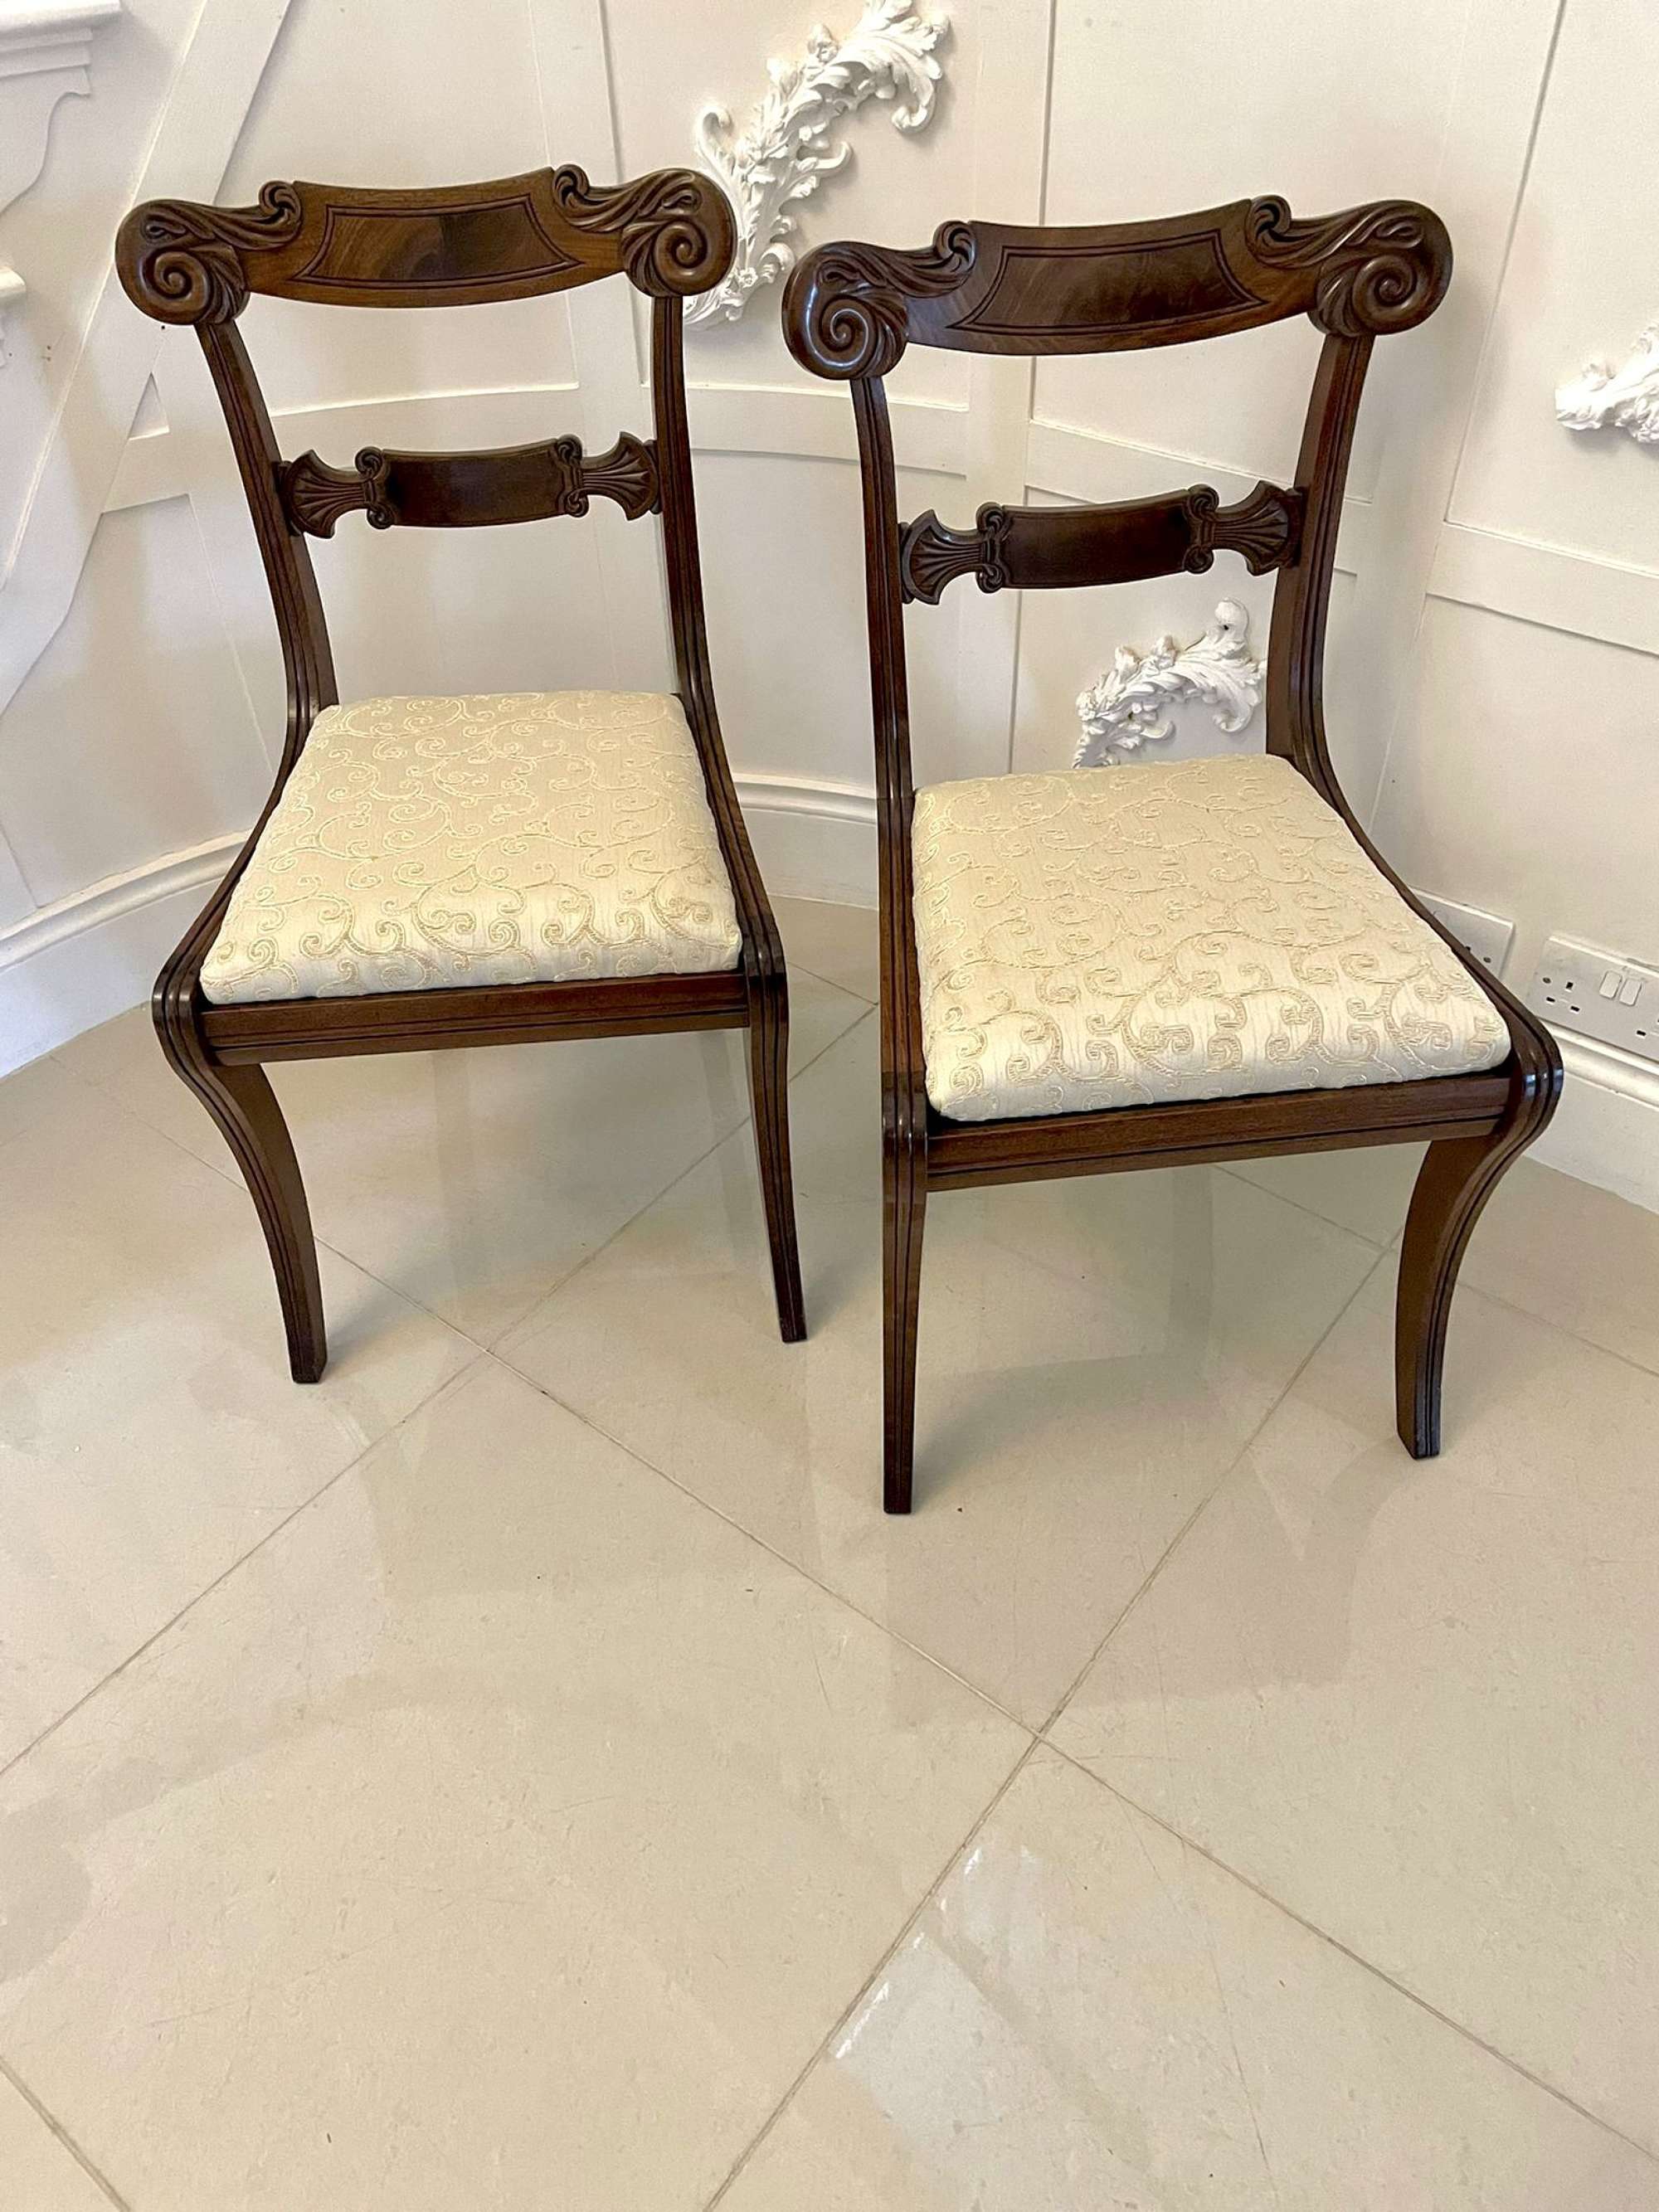 Pair Of Quality Antique Regency Carved Mahogany Side Chairs